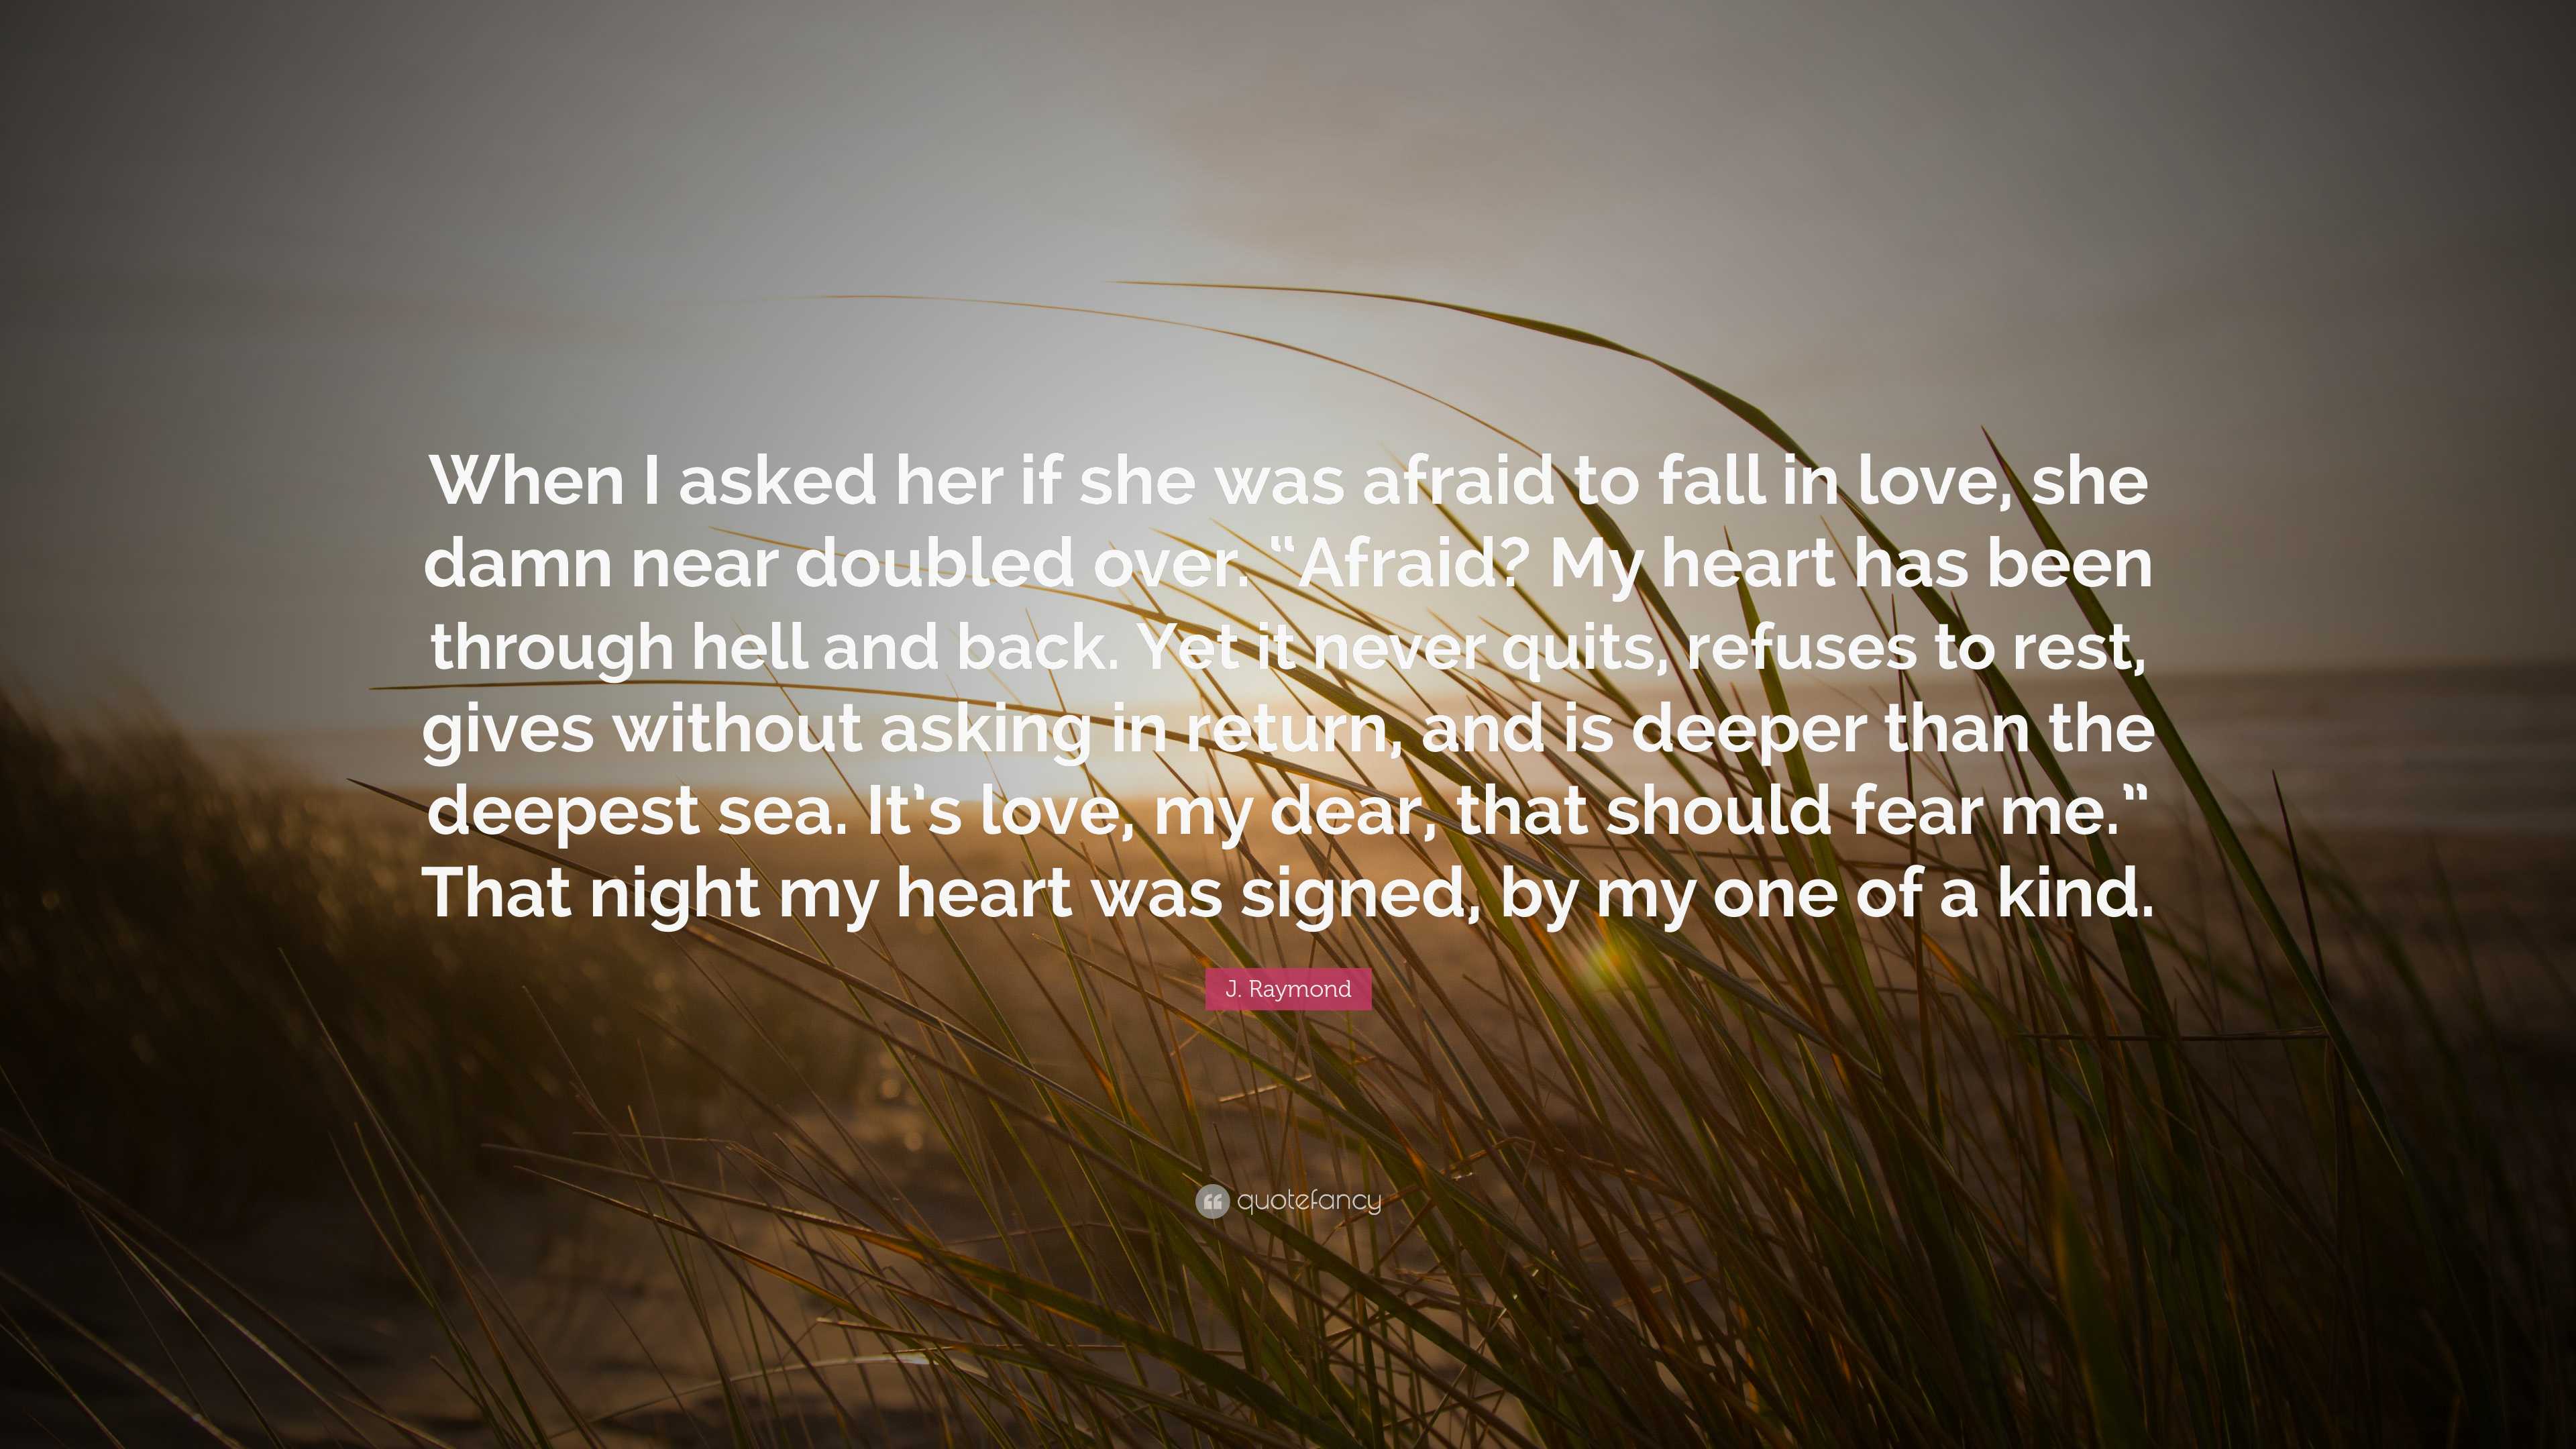 J. Raymond Quote: “When I asked her if she was afraid to fall in